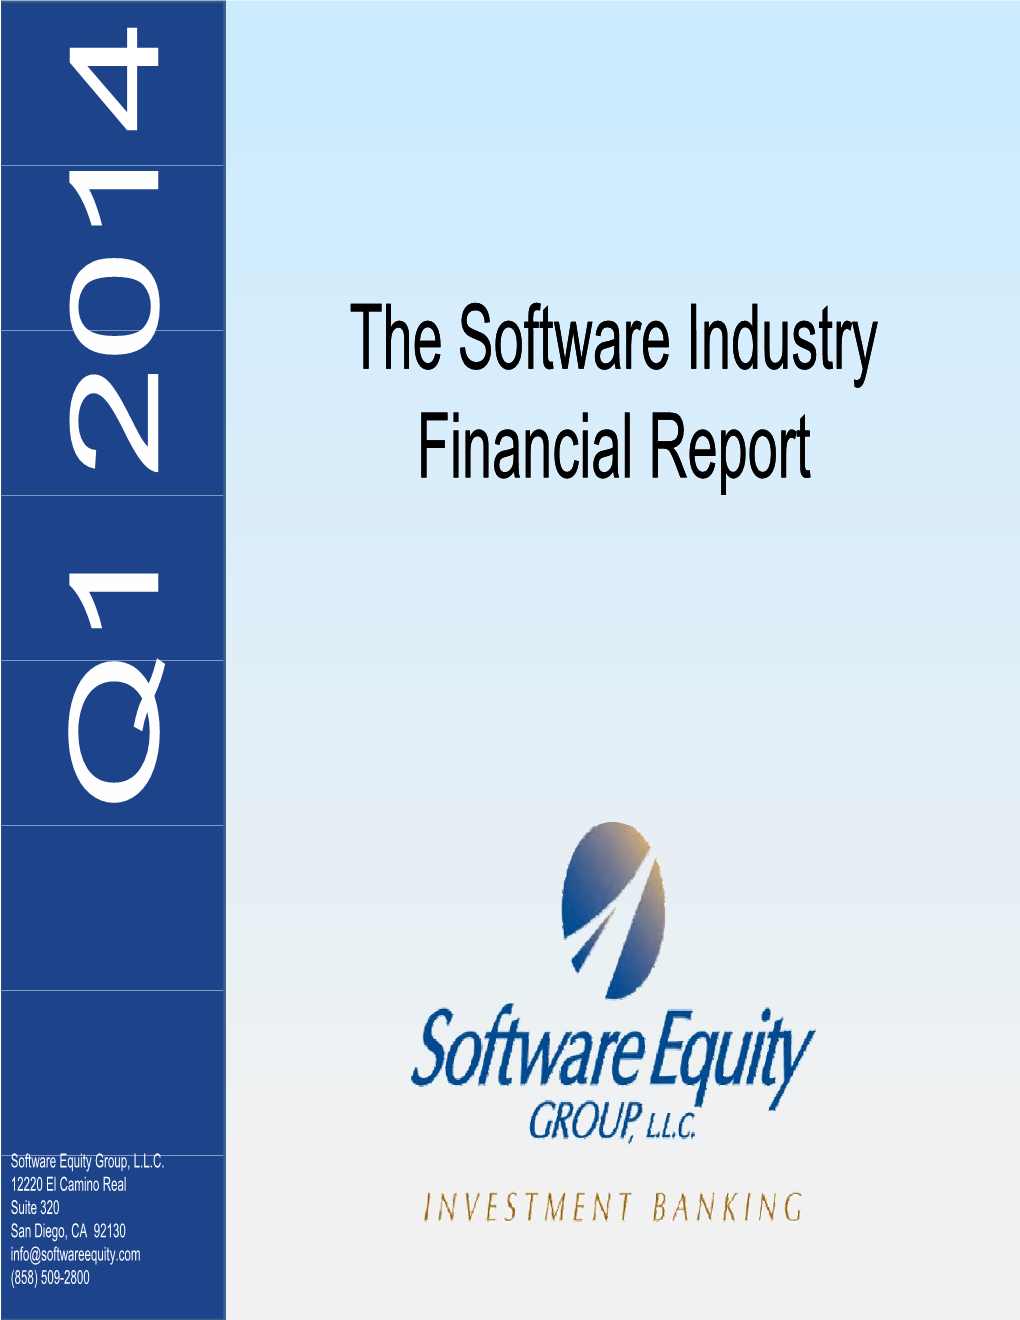 Software Industry Financial Report Contents